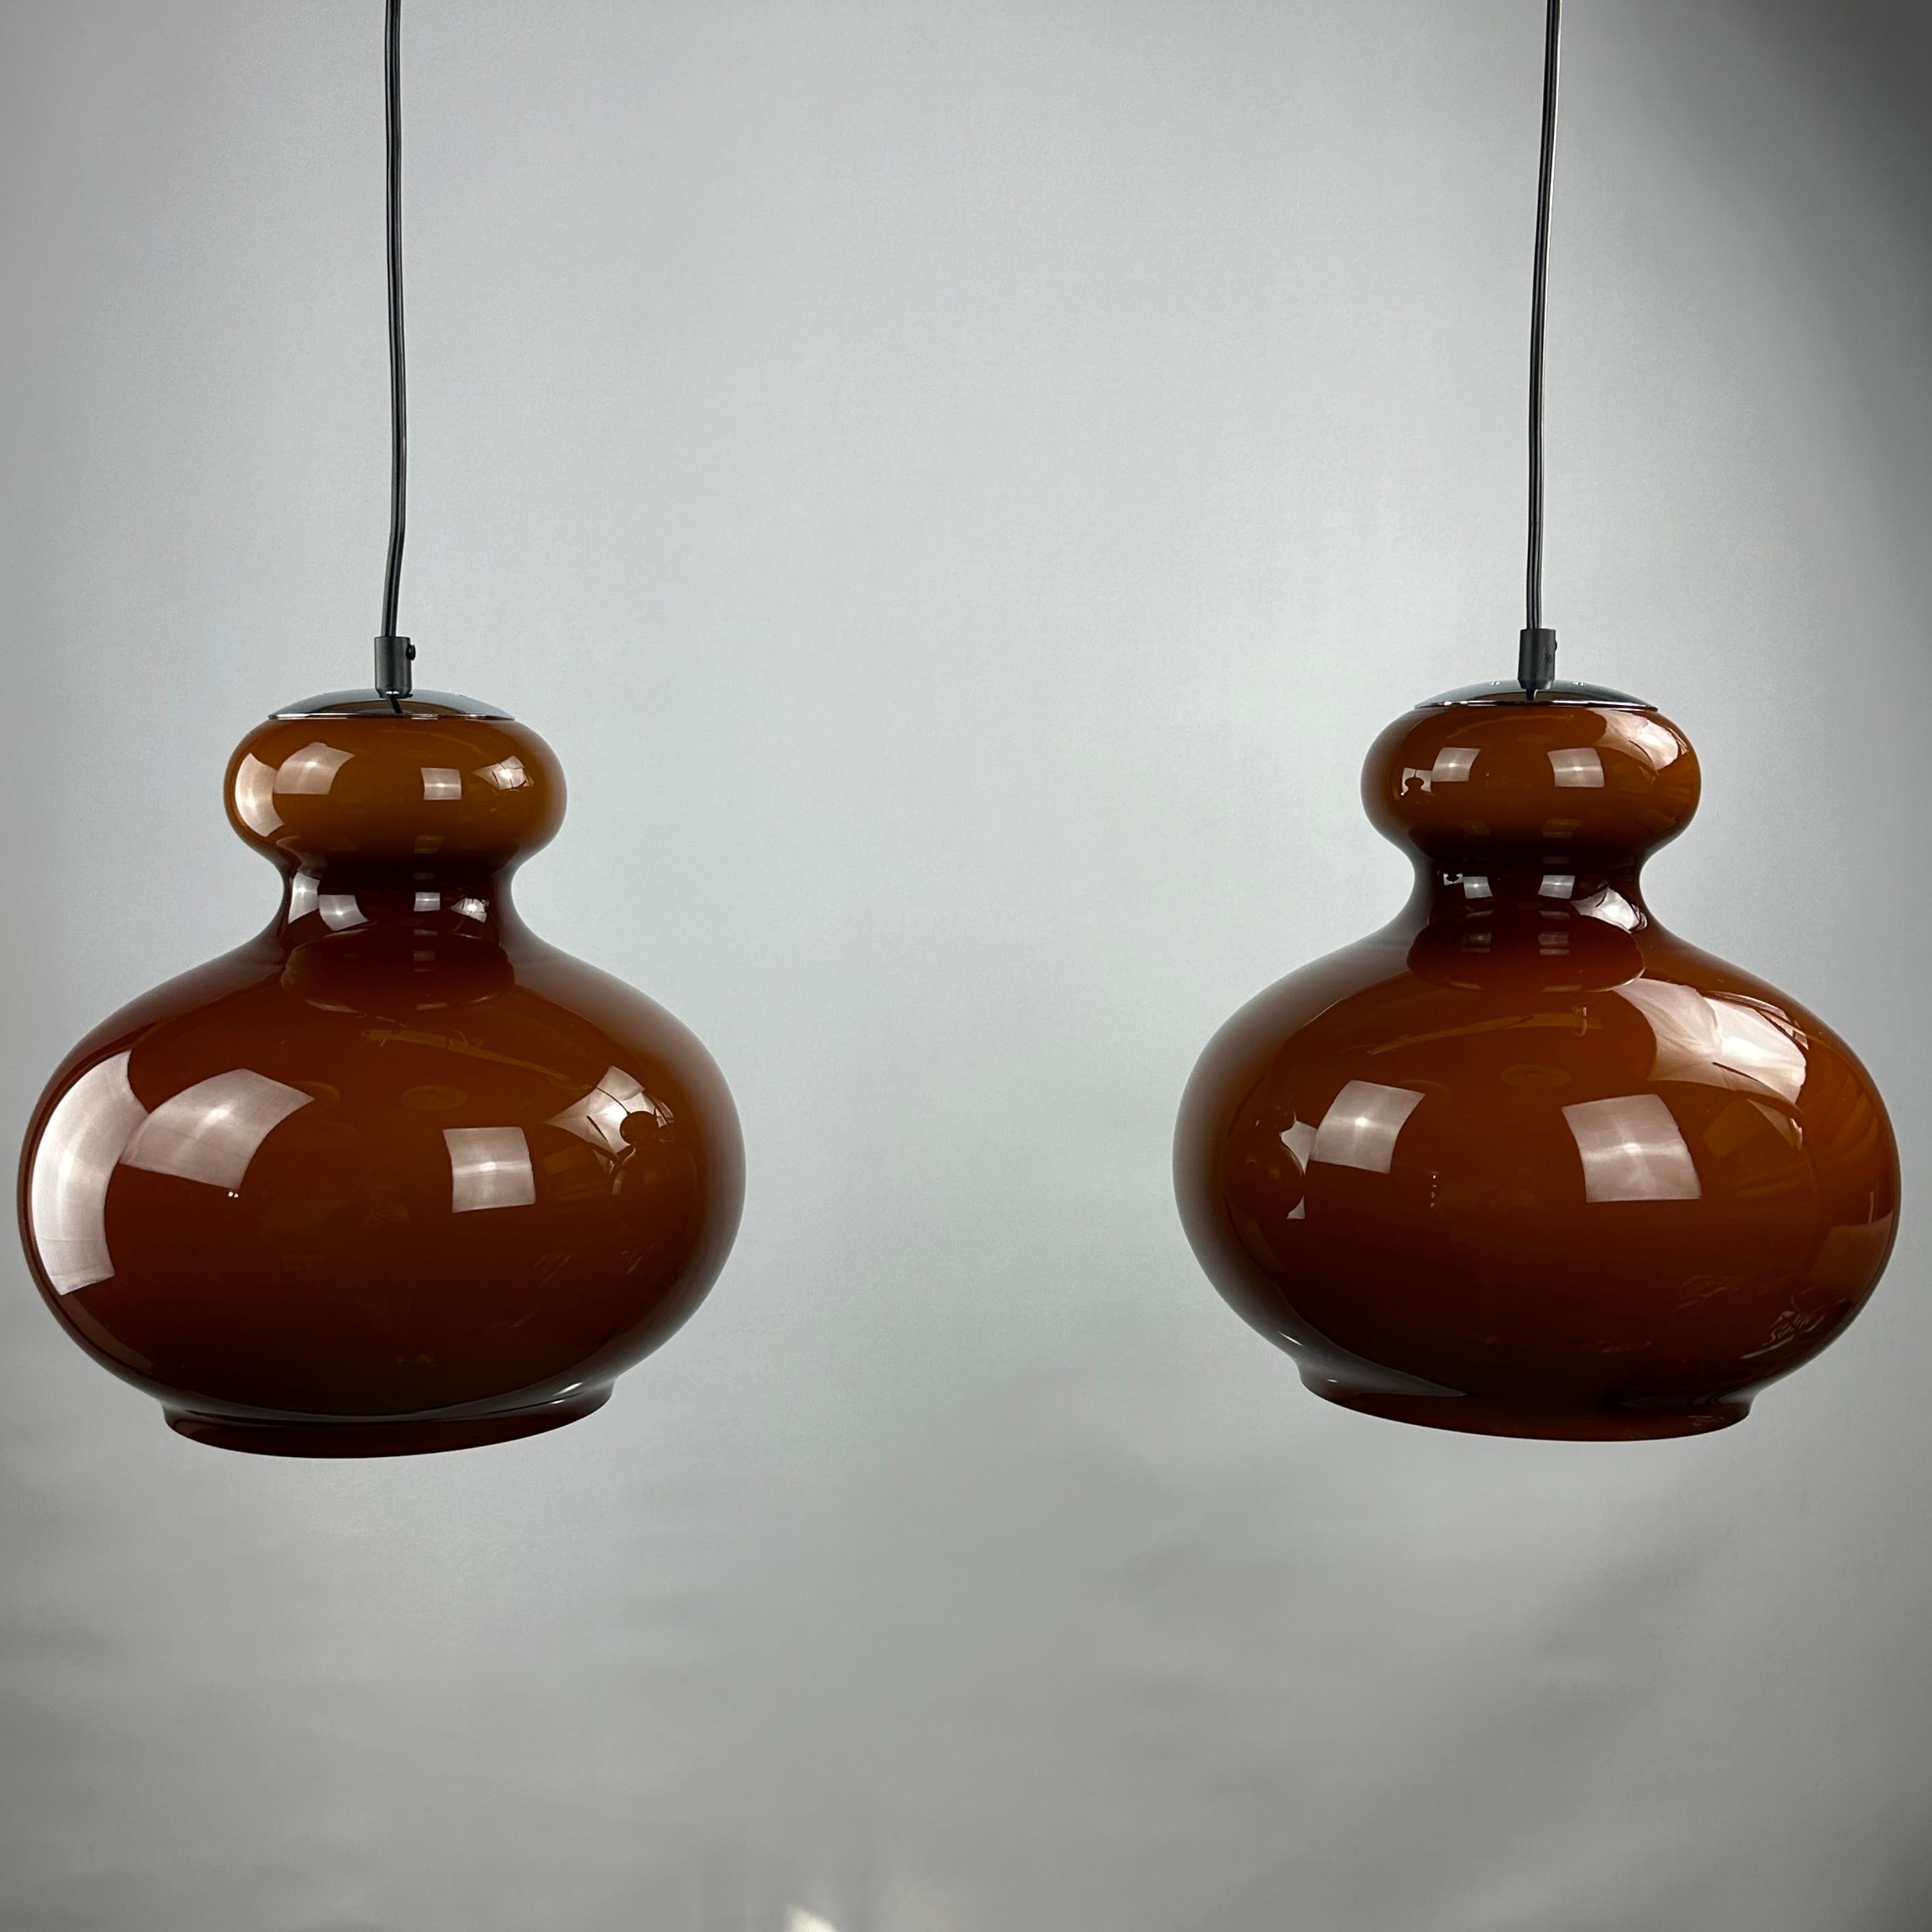 Gorgeous set of two brown opaline glass pendant lights by Peill and Putzler, produced around 1960. Has a very funky brown color when off and gives a very warm light when on.

Price is for the pair.

 

DIMENSIONS

Height: 24cm
Diameter: 25cm
Cord